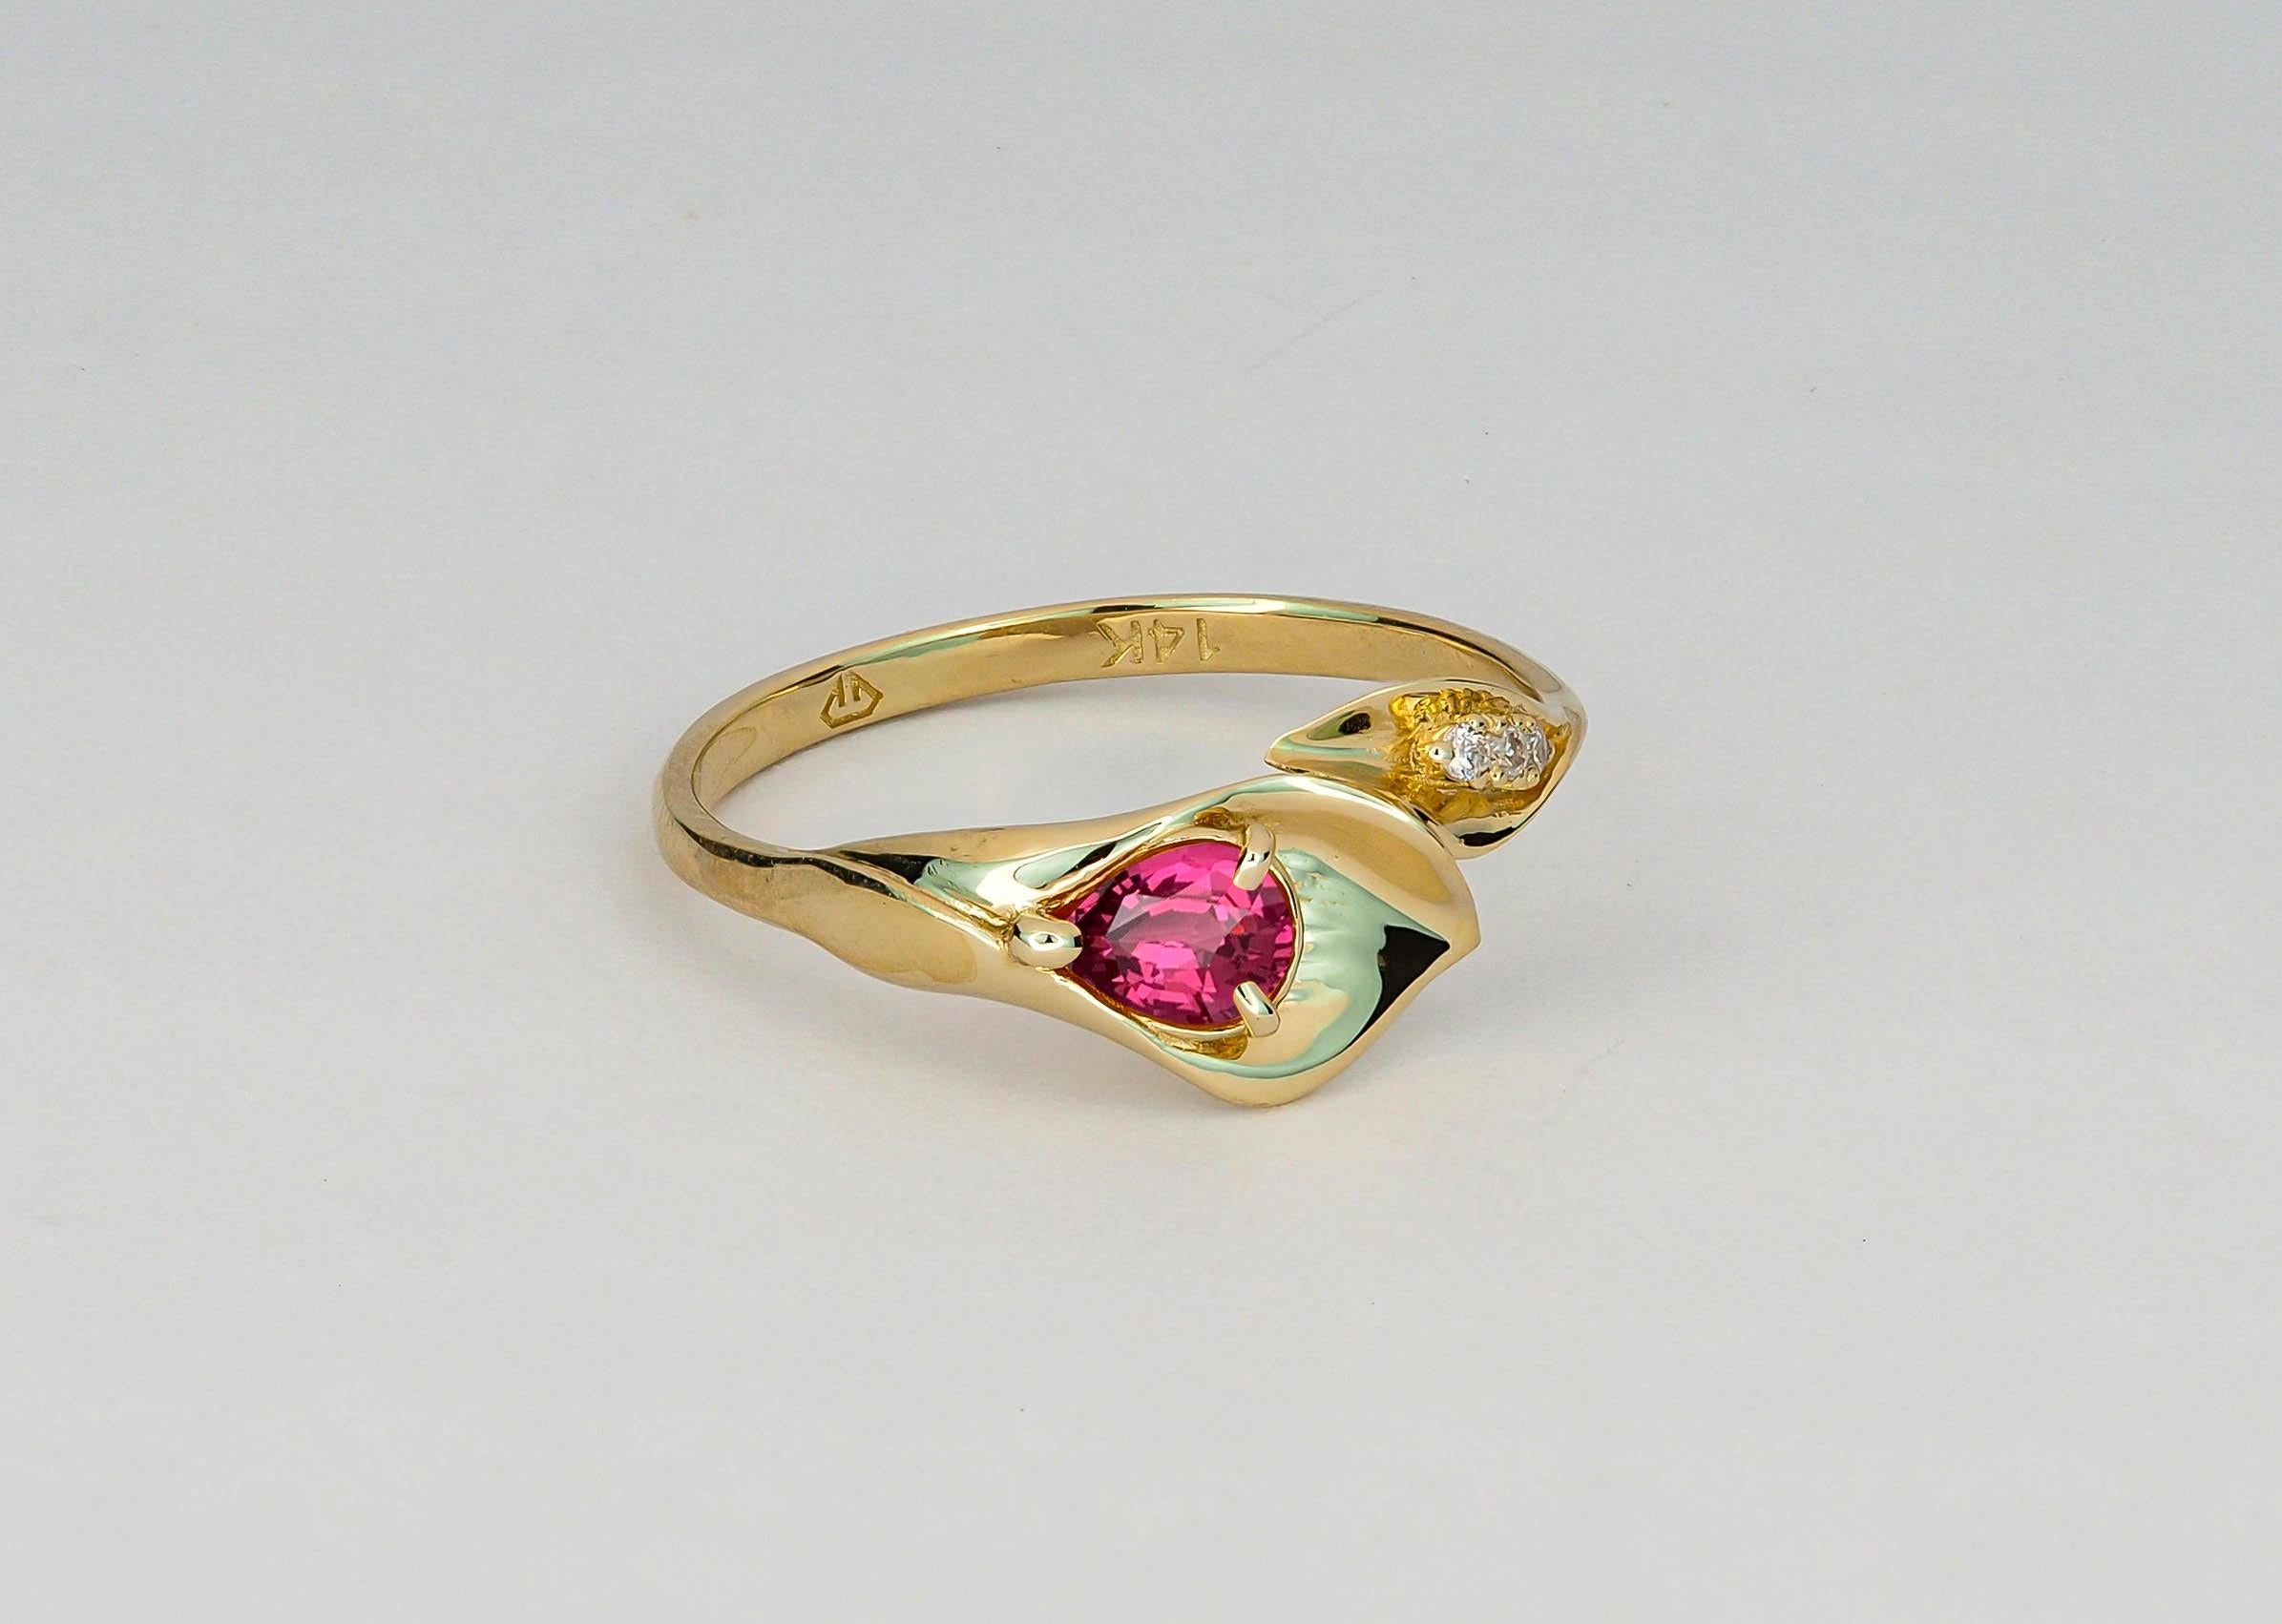 For Sale:  Lily Calla Gold Ring, 14 Karat Gold Ring with Garnet and Diamonds 2